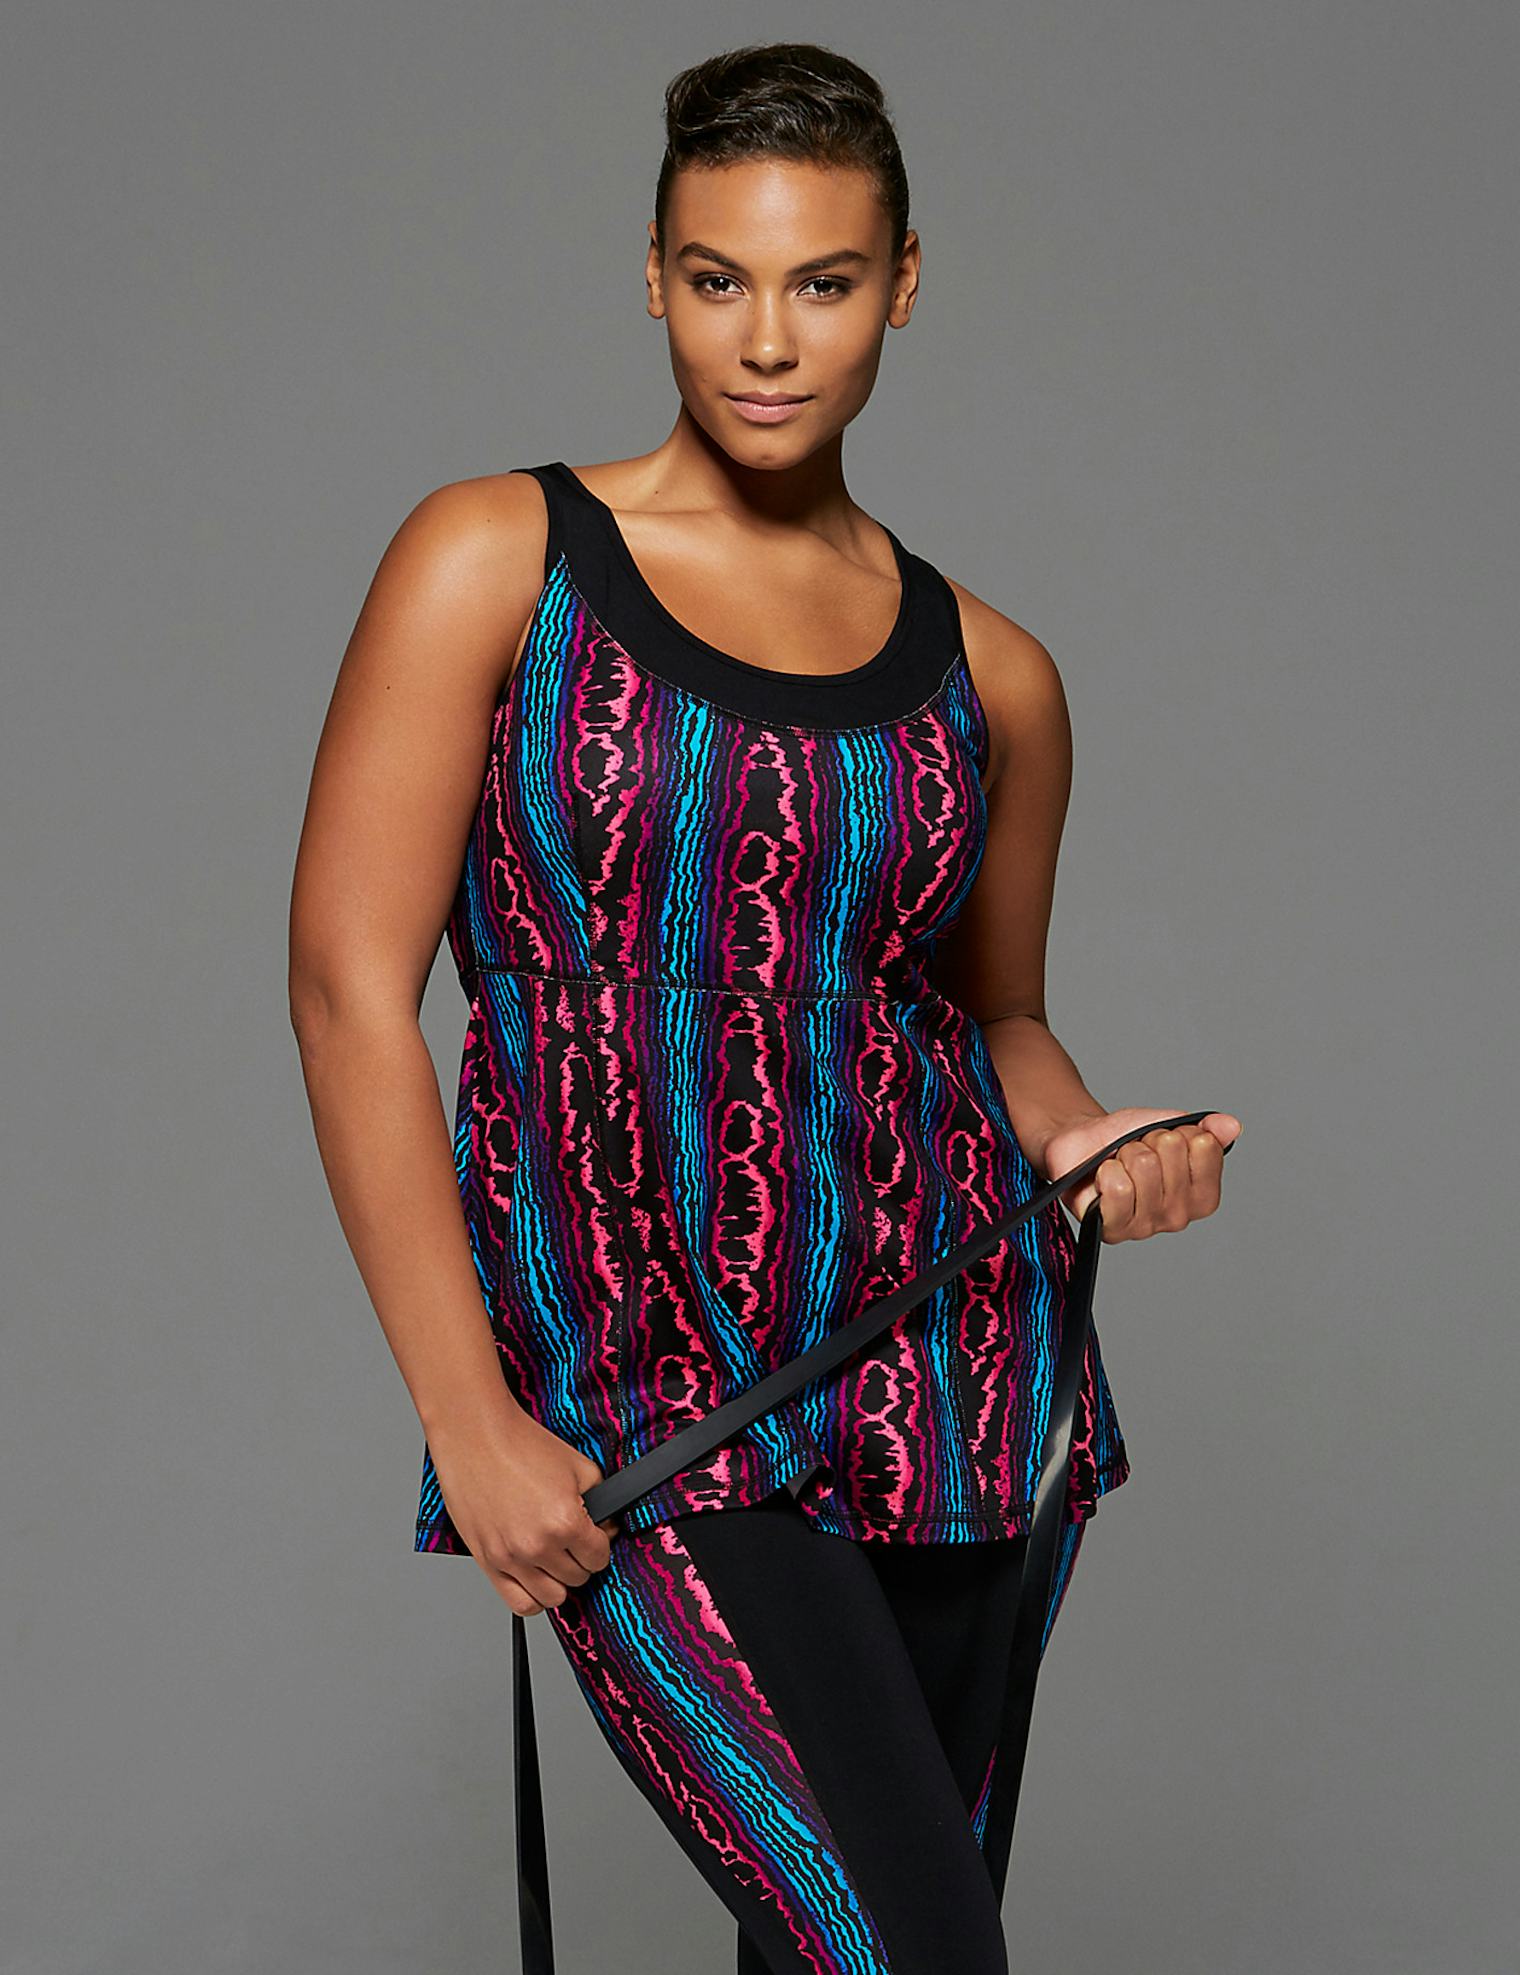 17 Cute Plus Size Workout Clothes To Feel Strong And Get Sweaty In 9648